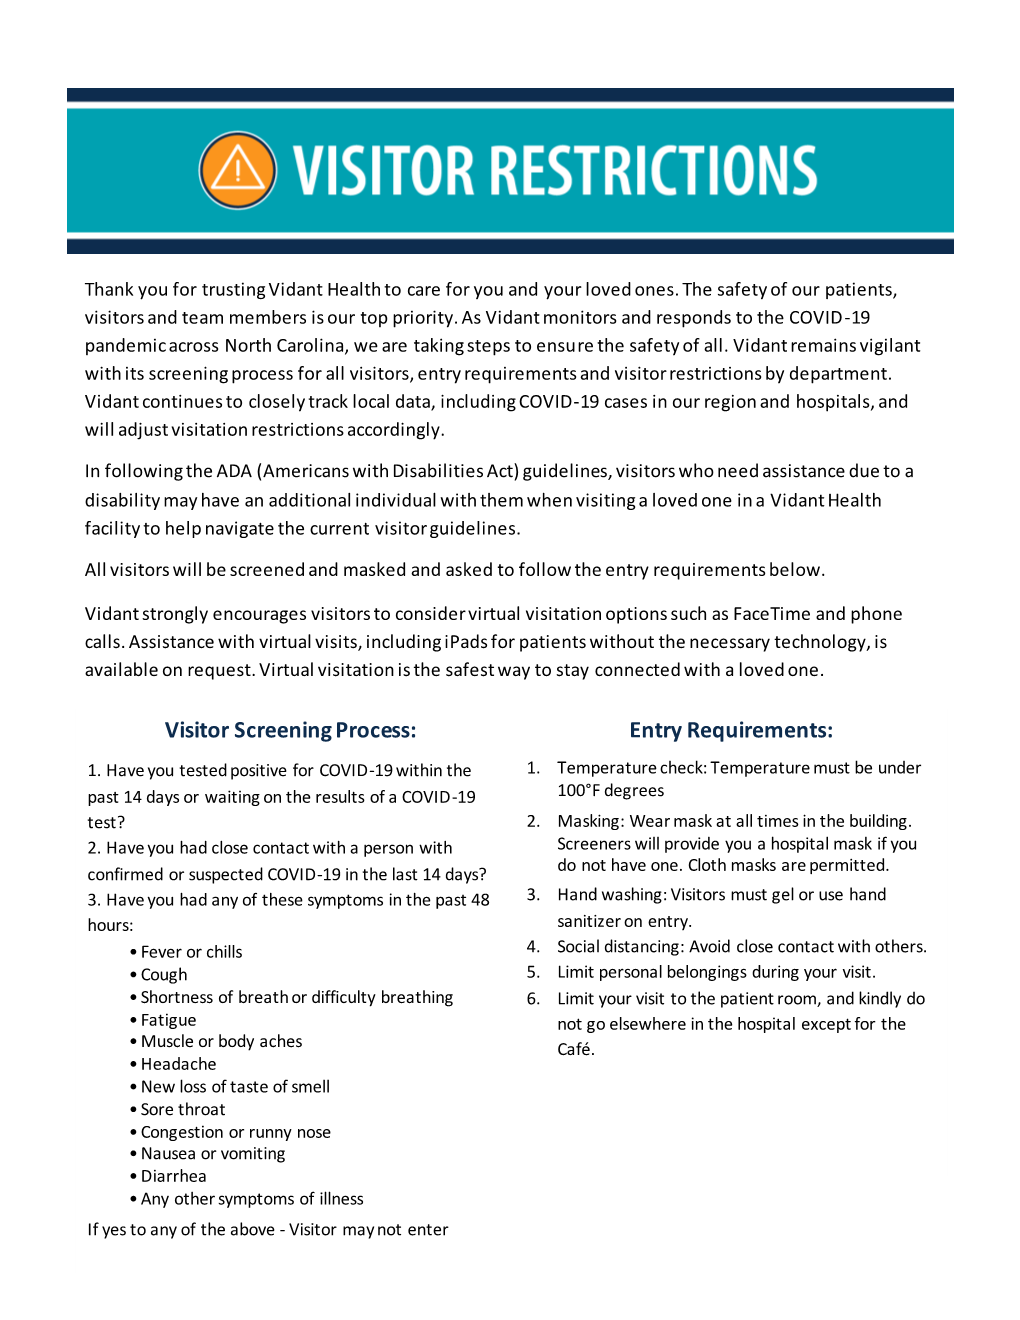 Visitor Screening Process: Entry Requirements